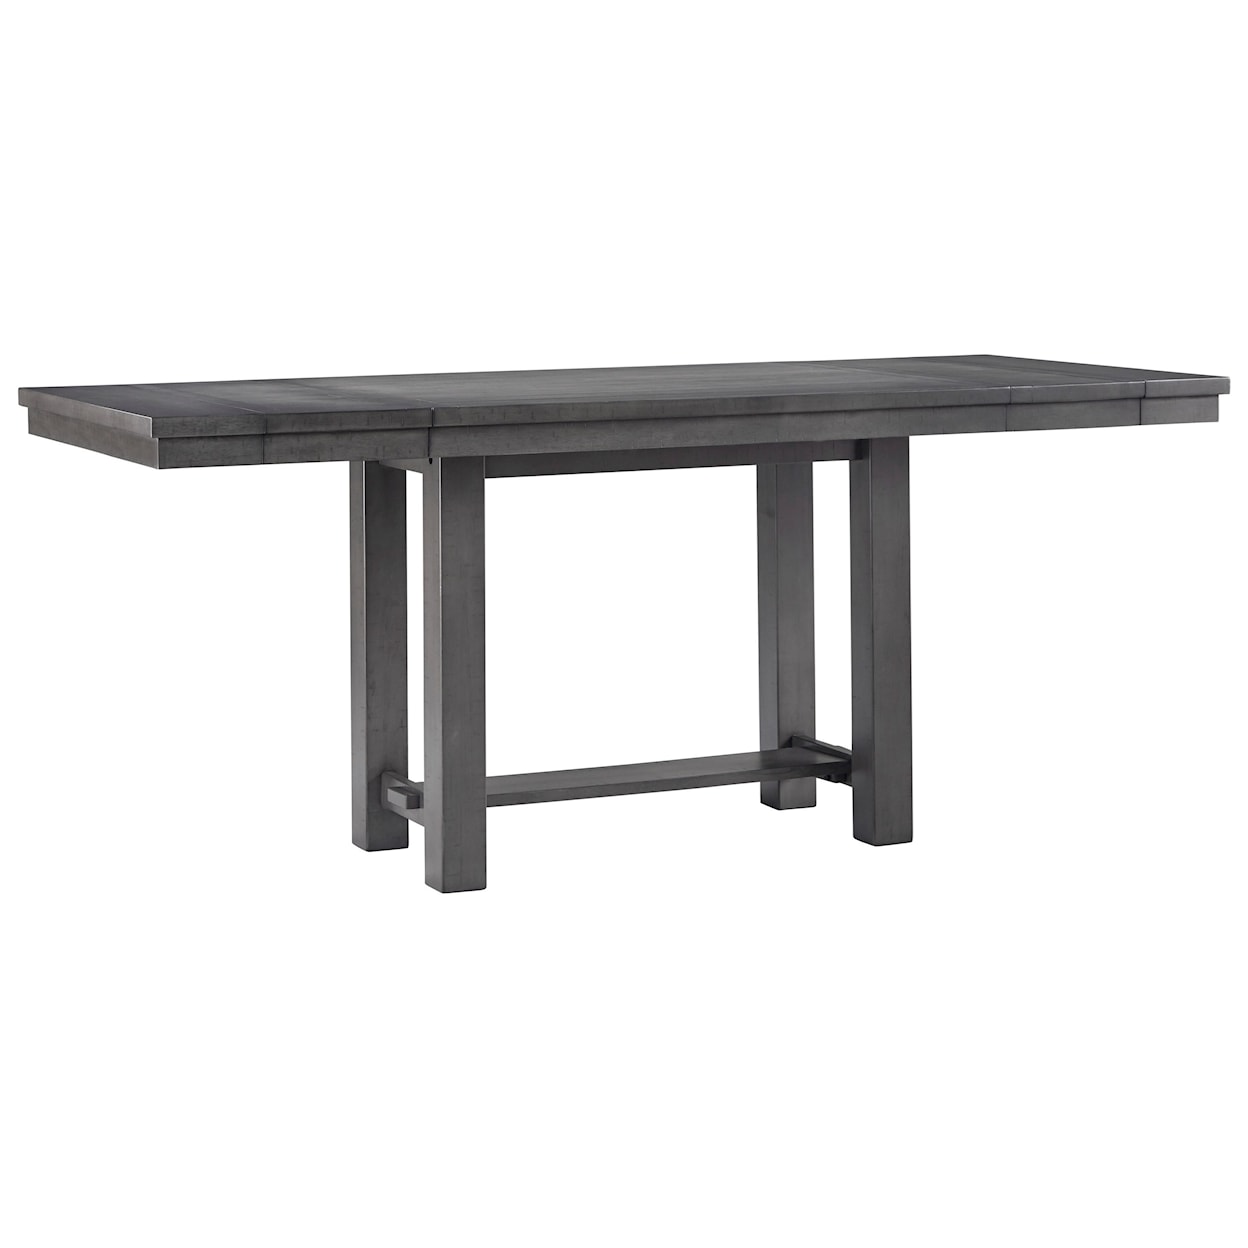 StyleLine ZITI Counter Height Dining Extension Table